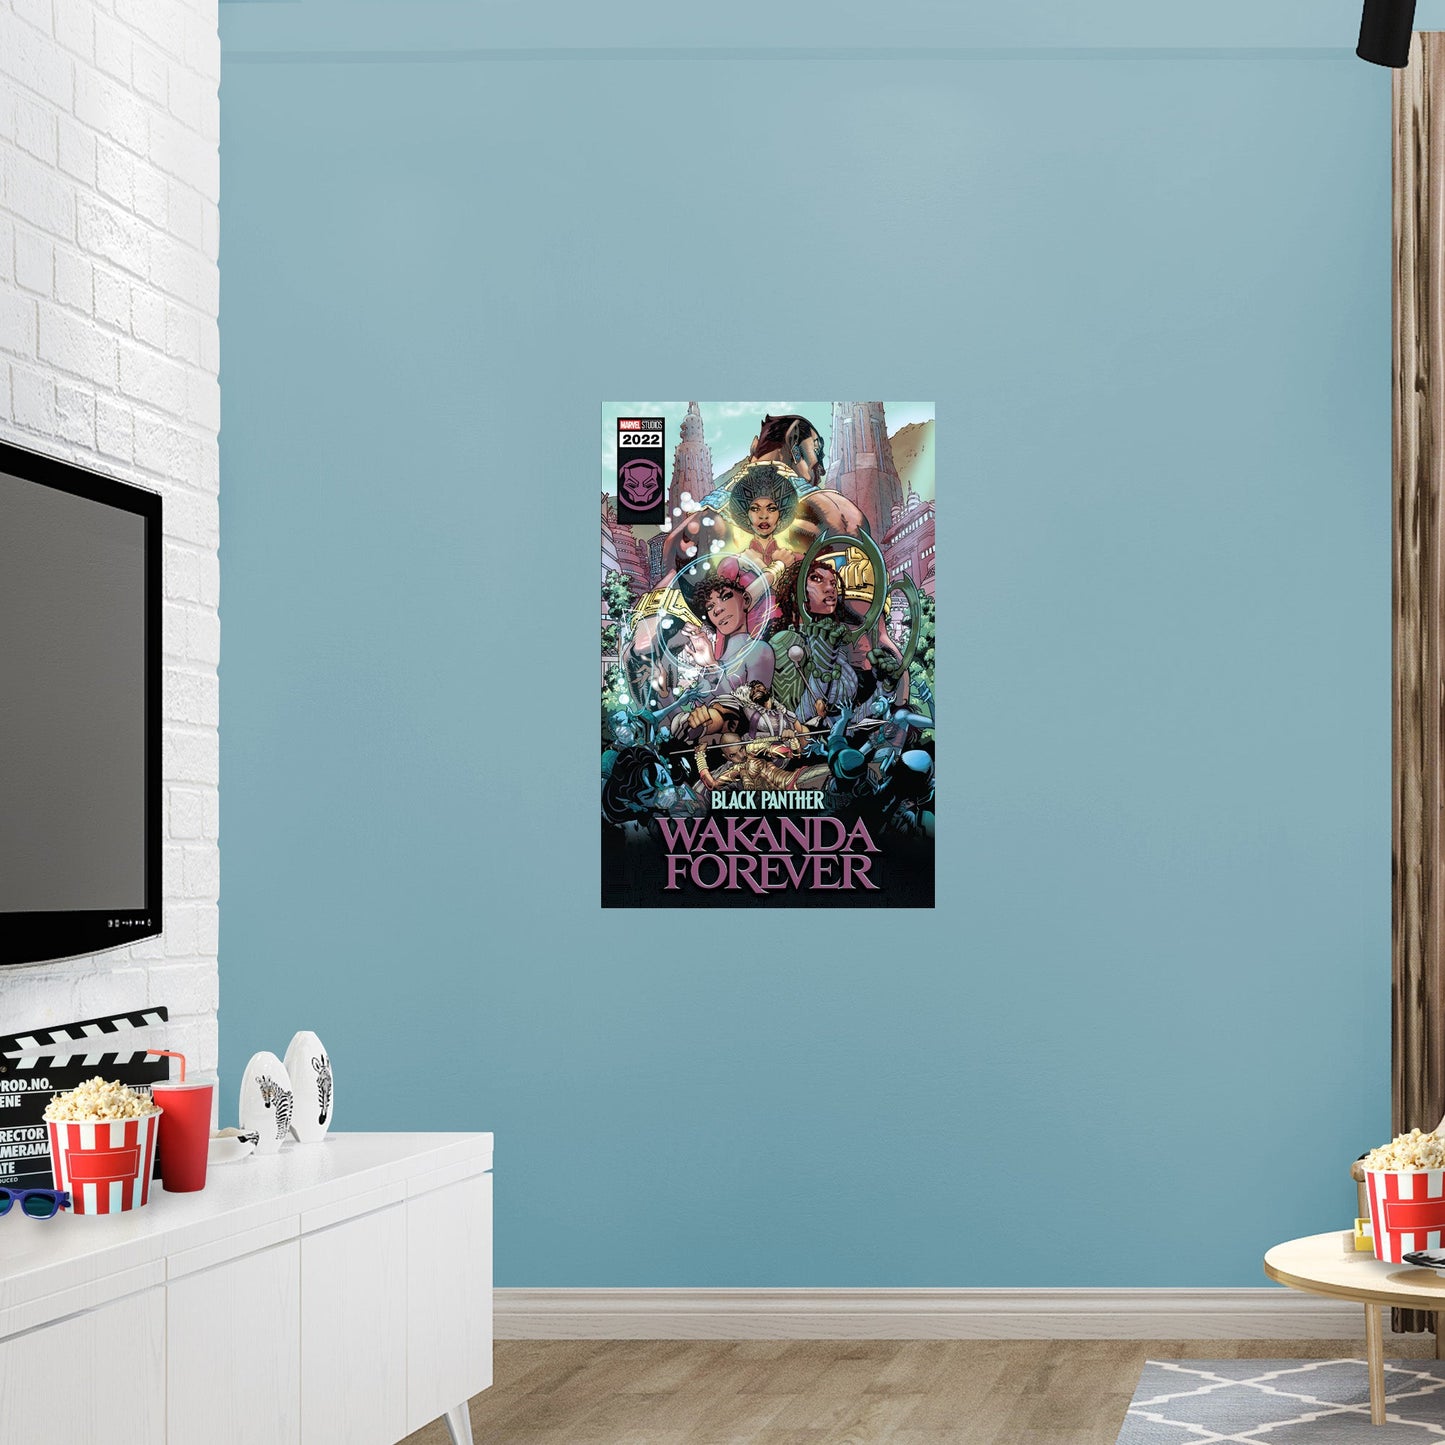 Black Panther Wakanda Forever: Homage Comic One Poster - Officially Licensed Marvel Removable Adhesive Decal